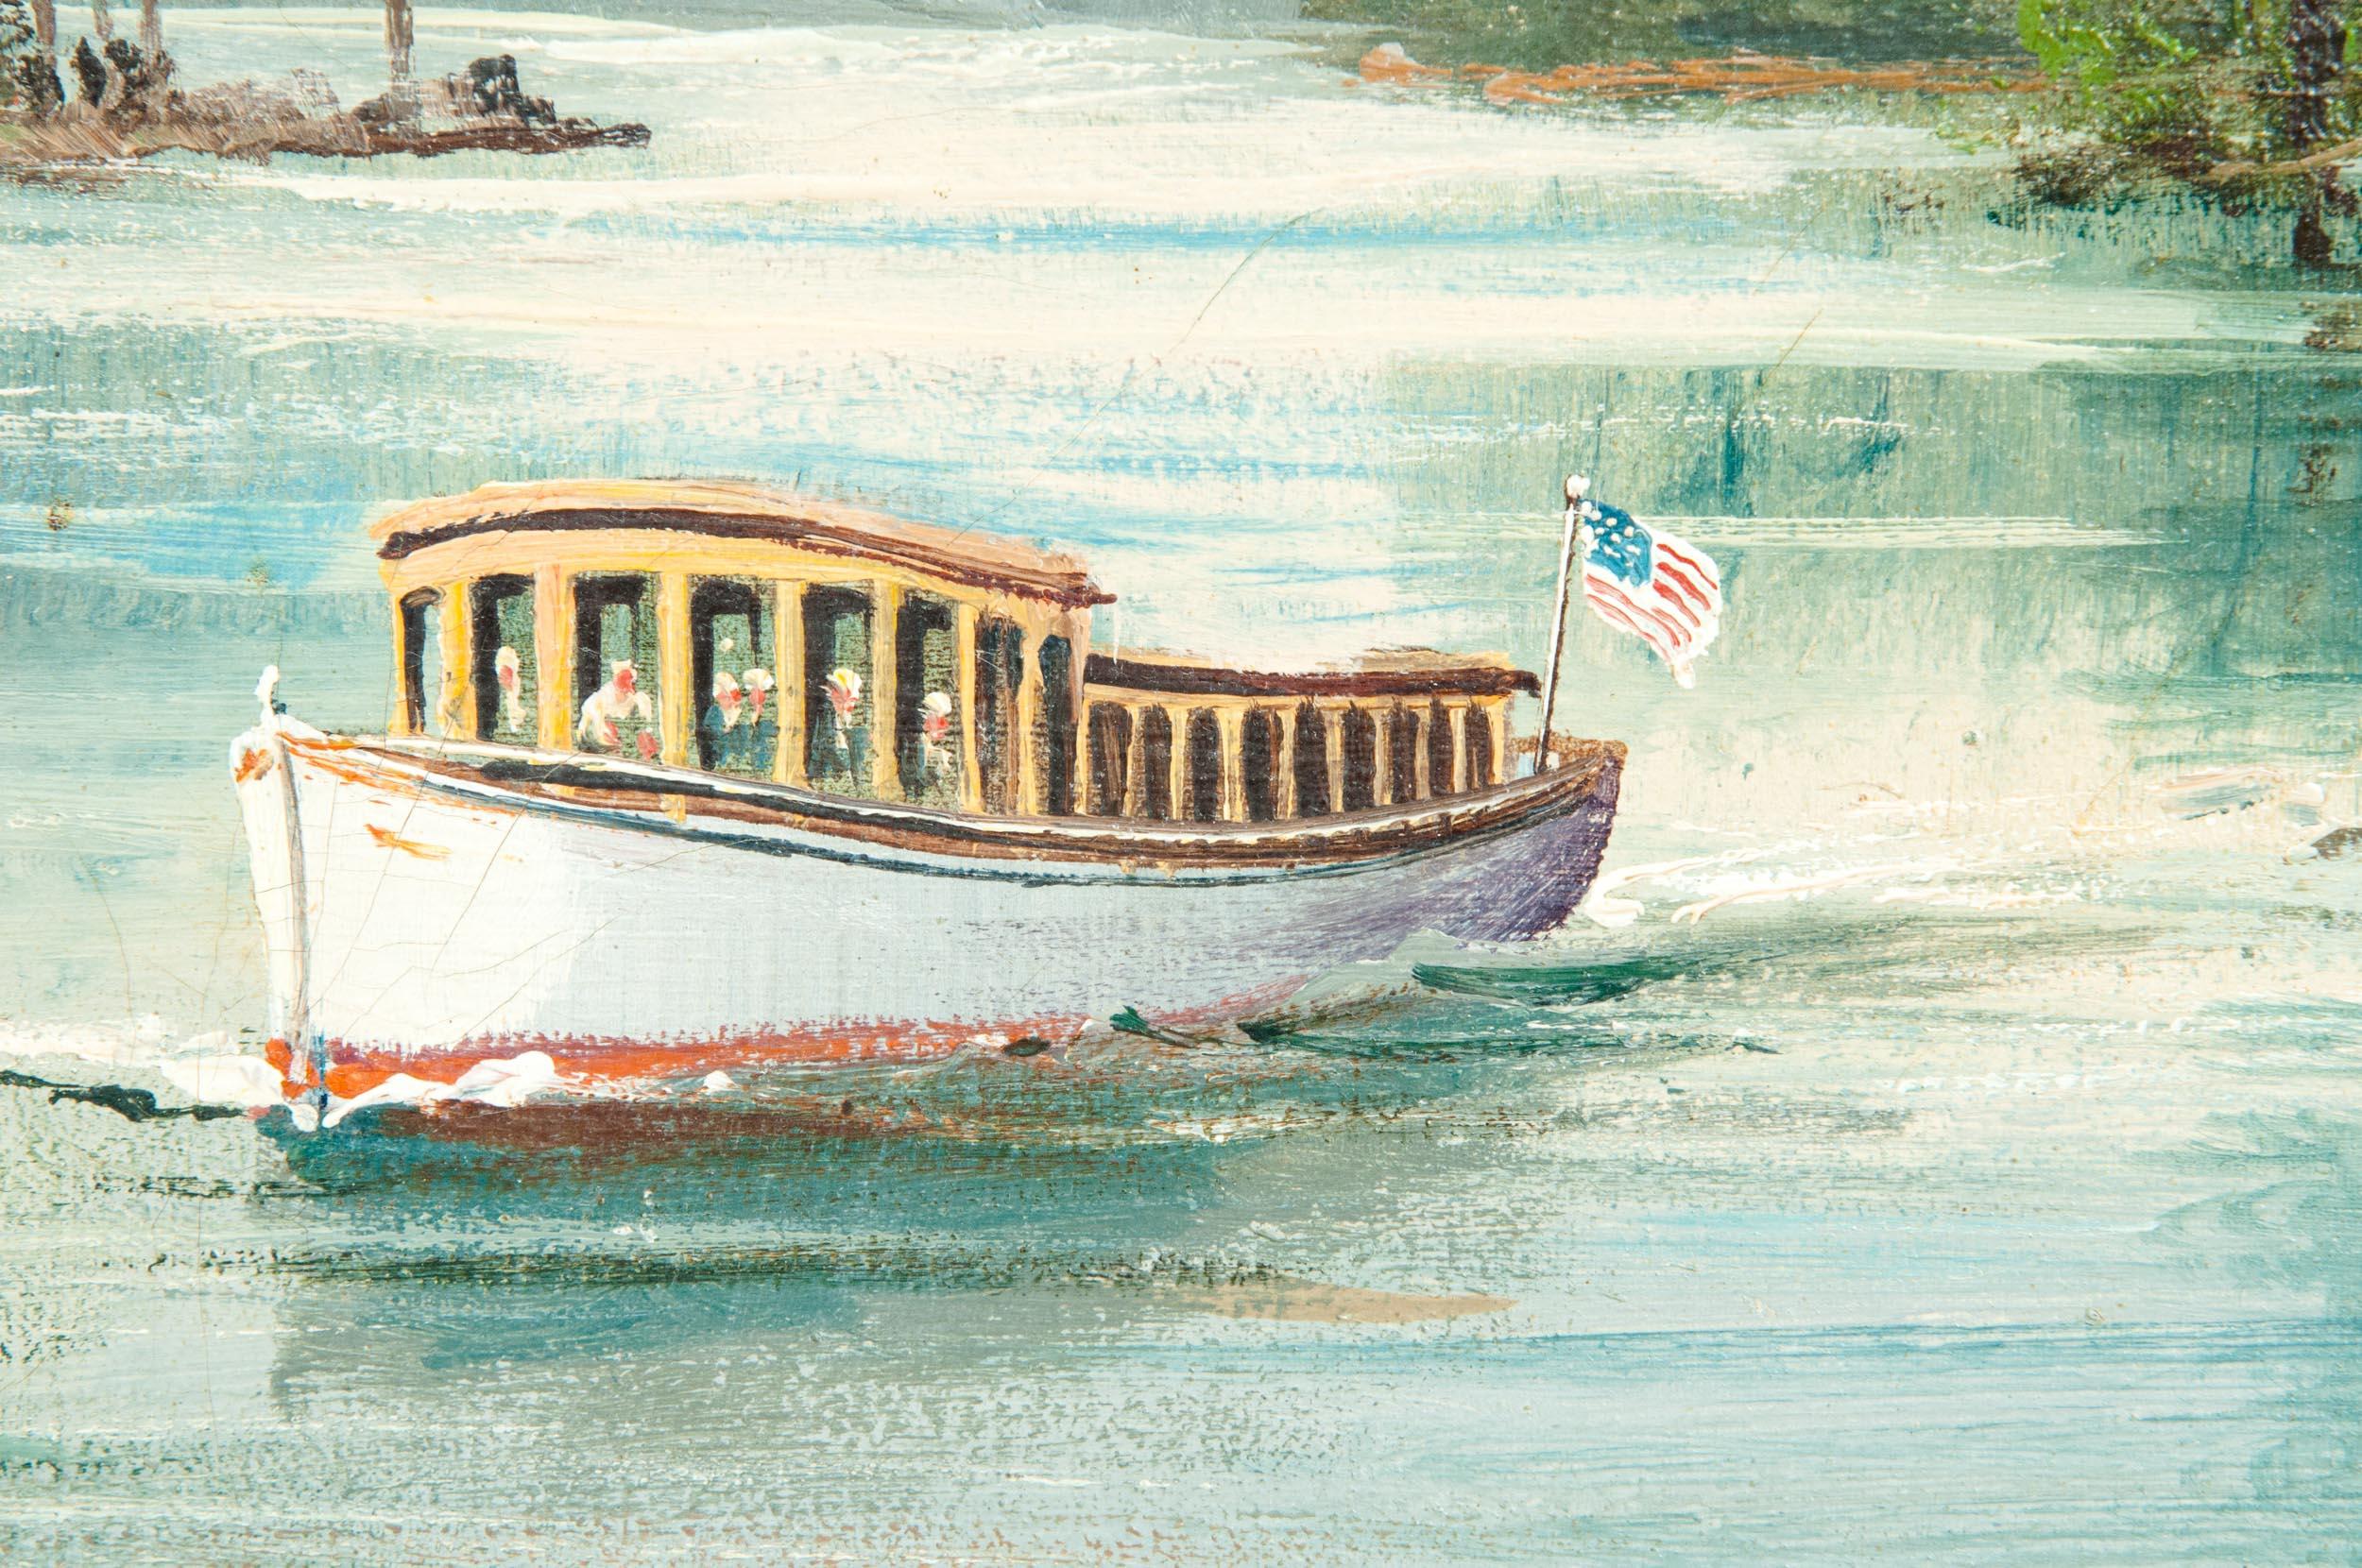 Mahogany wood frame oil on canvas painting house boat on the river . Artist signature and dated 1932 . The canvas measure about 39 inches long x 26 inches wide. The wood frame is about 44 inches long x 31 inches wide. The painting is in great